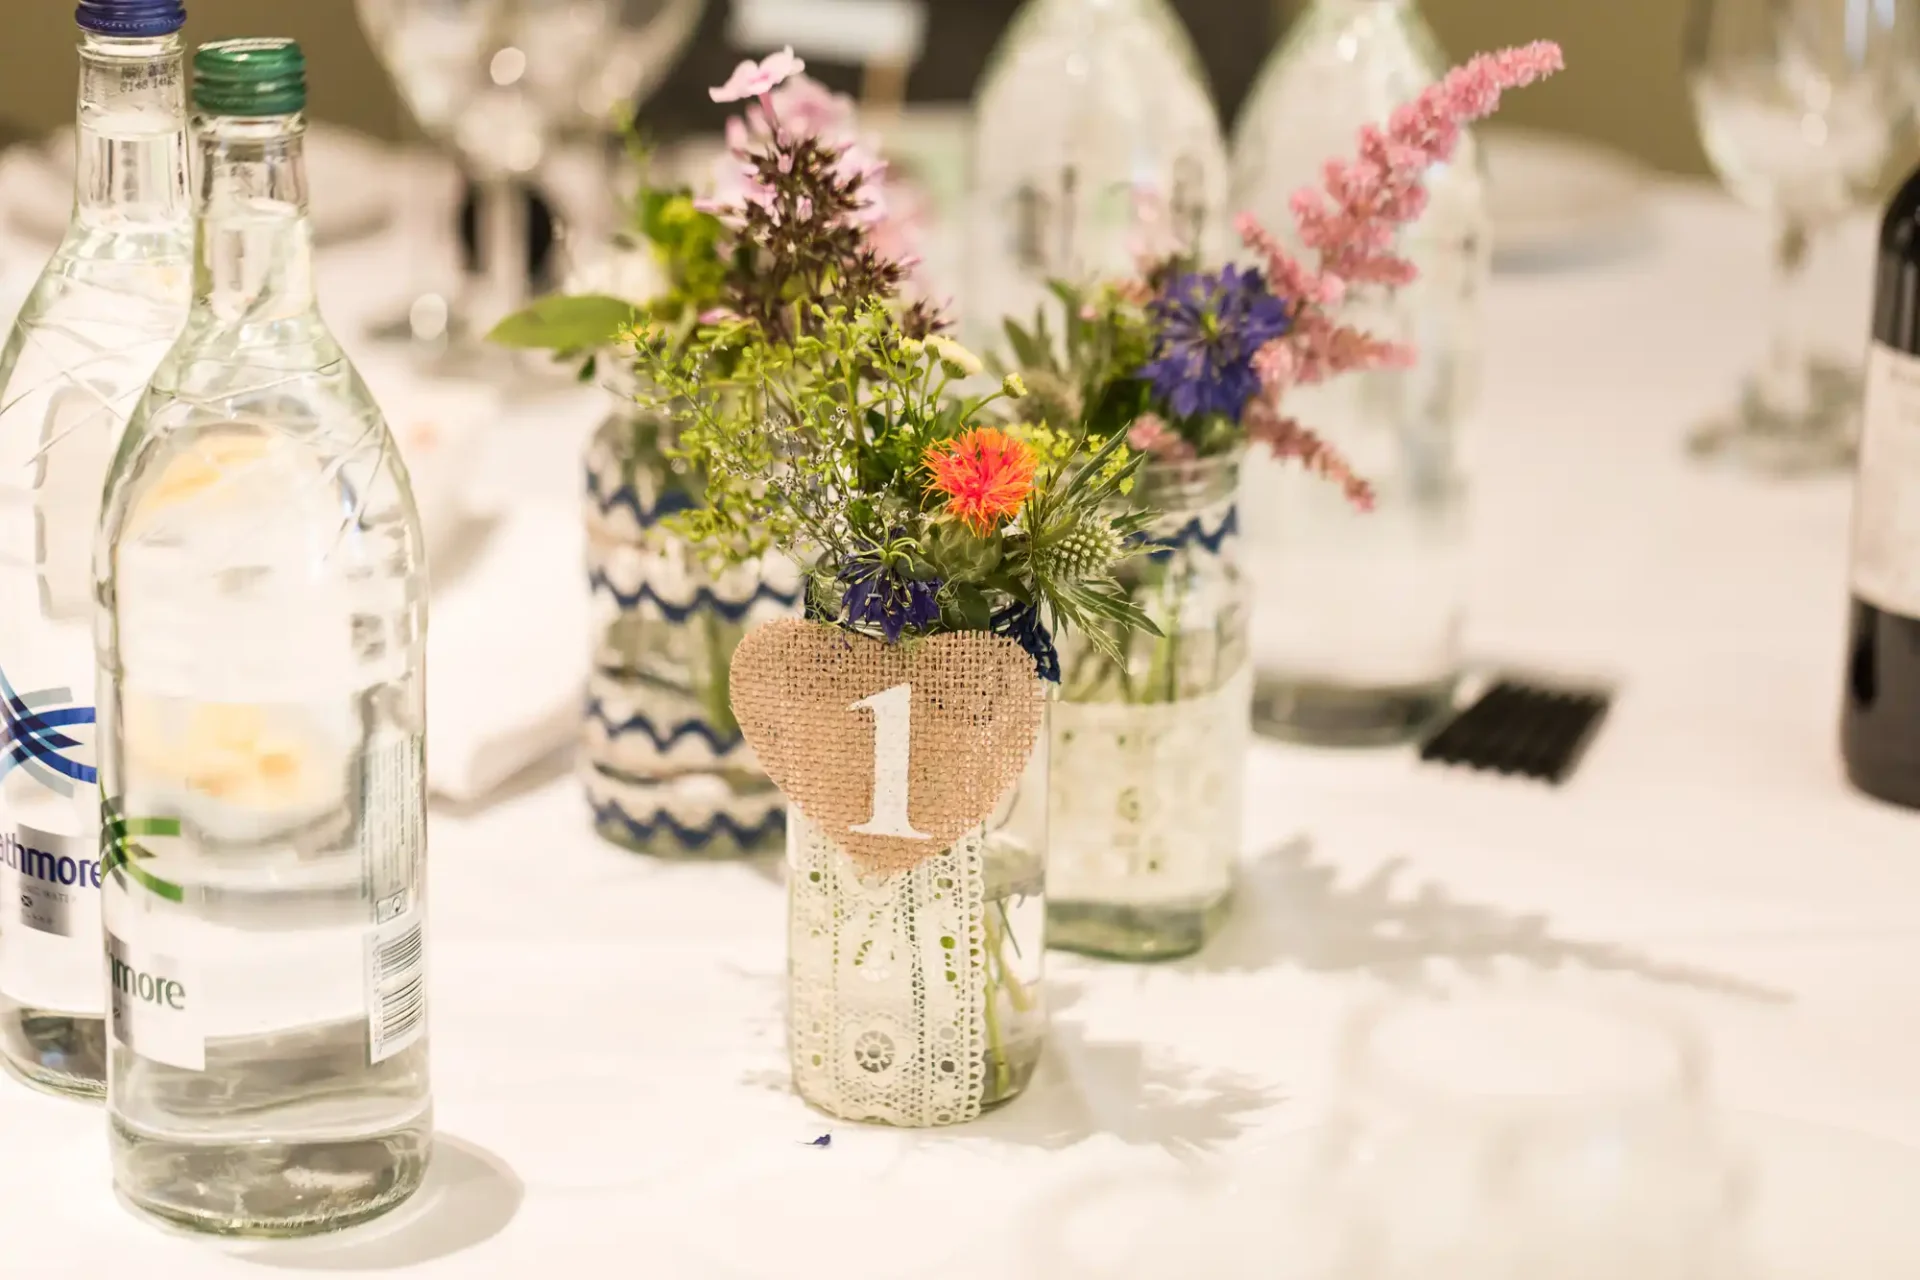 Elegant table setting featuring a floral centerpiece in a decorated vase marked with the number "1," accompanied by two bottles of water.